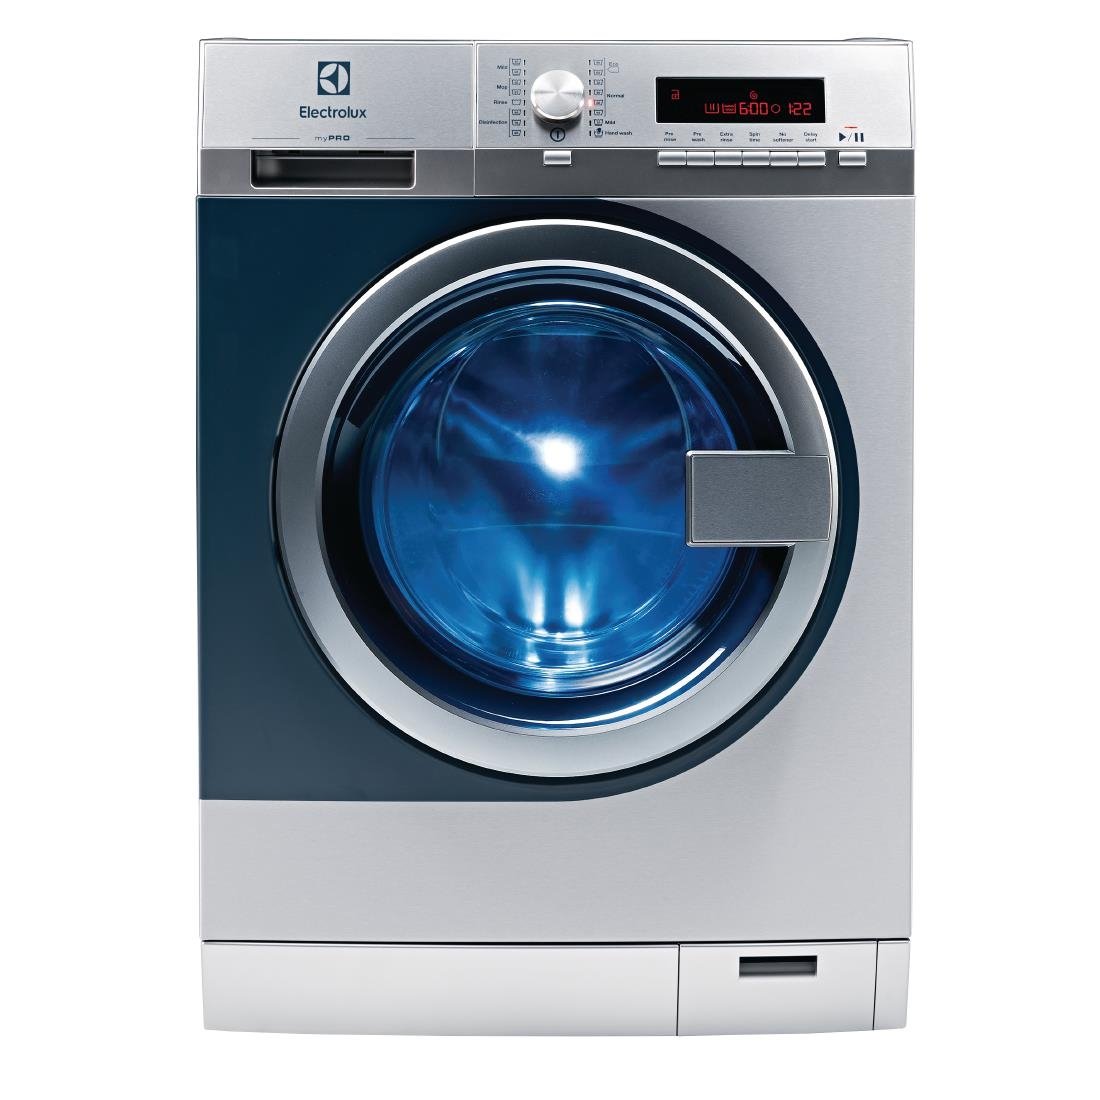 CK411 Electrolux myPRO Commercial Washing Machine WE170V Gravity Drain With Sluice Function